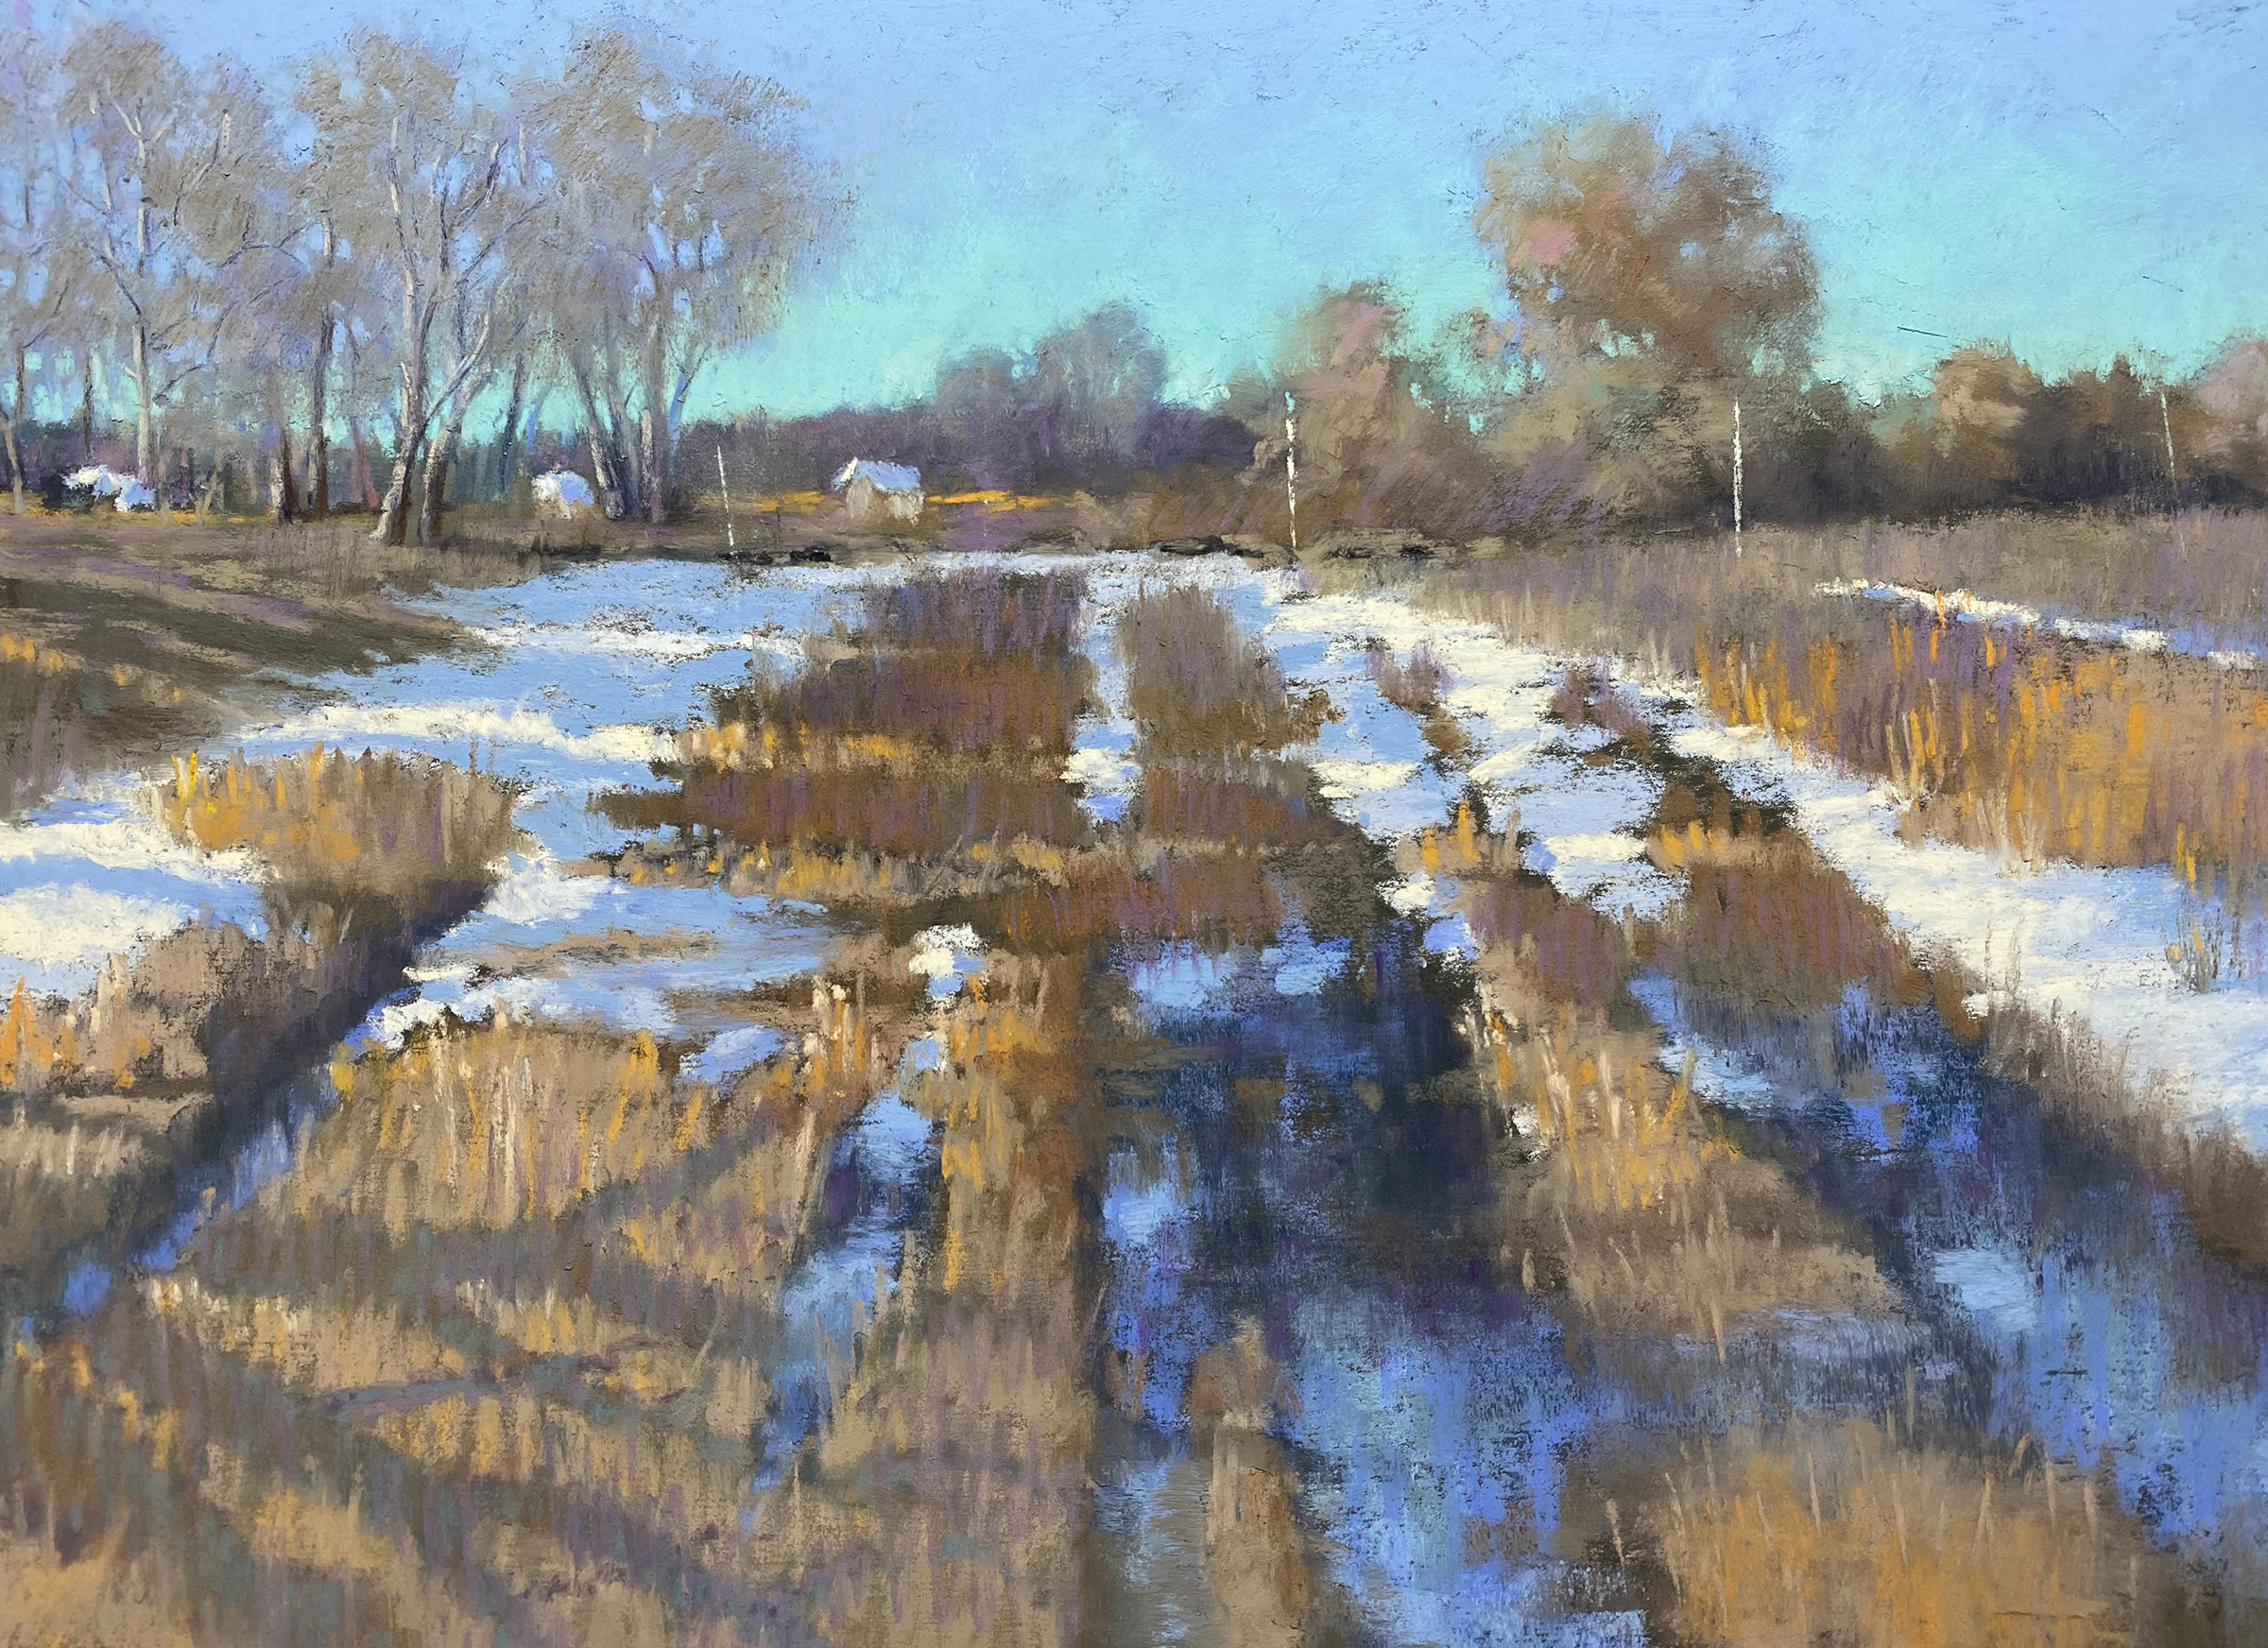 Pastel paintings of a snowy field - "Snowmelt"